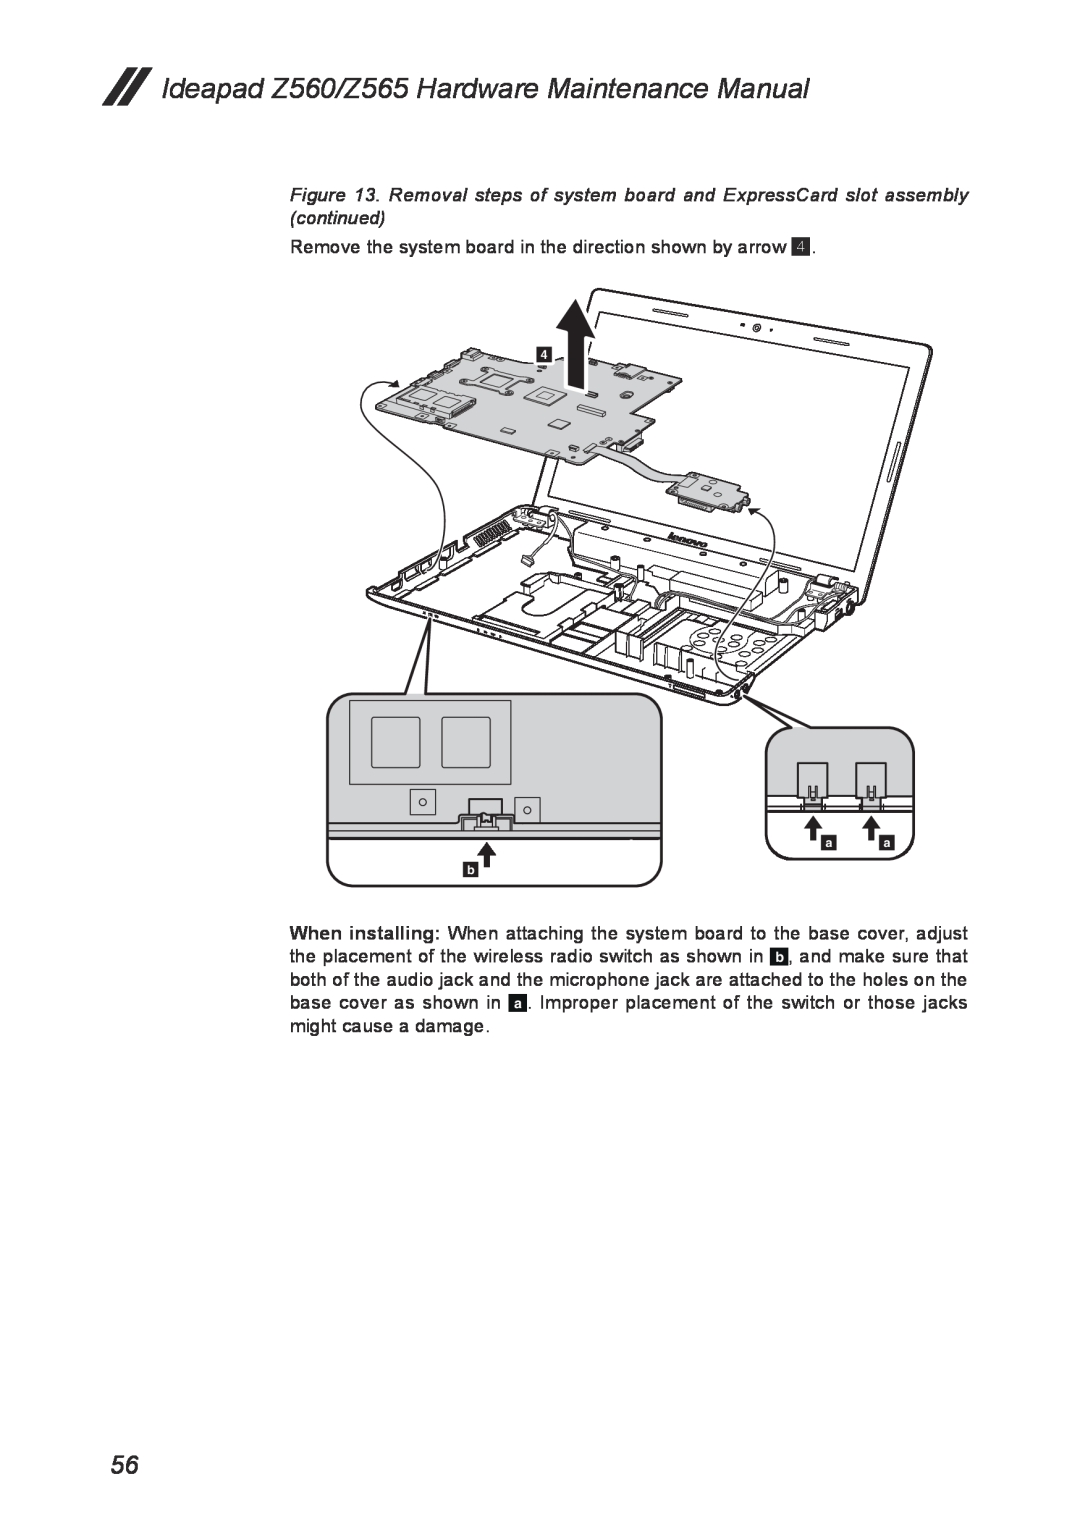 Lenovo manual Ideapad Z560/Z565 Hardware Maintenance Manual, Remove the system board in the direction shown by arrow 